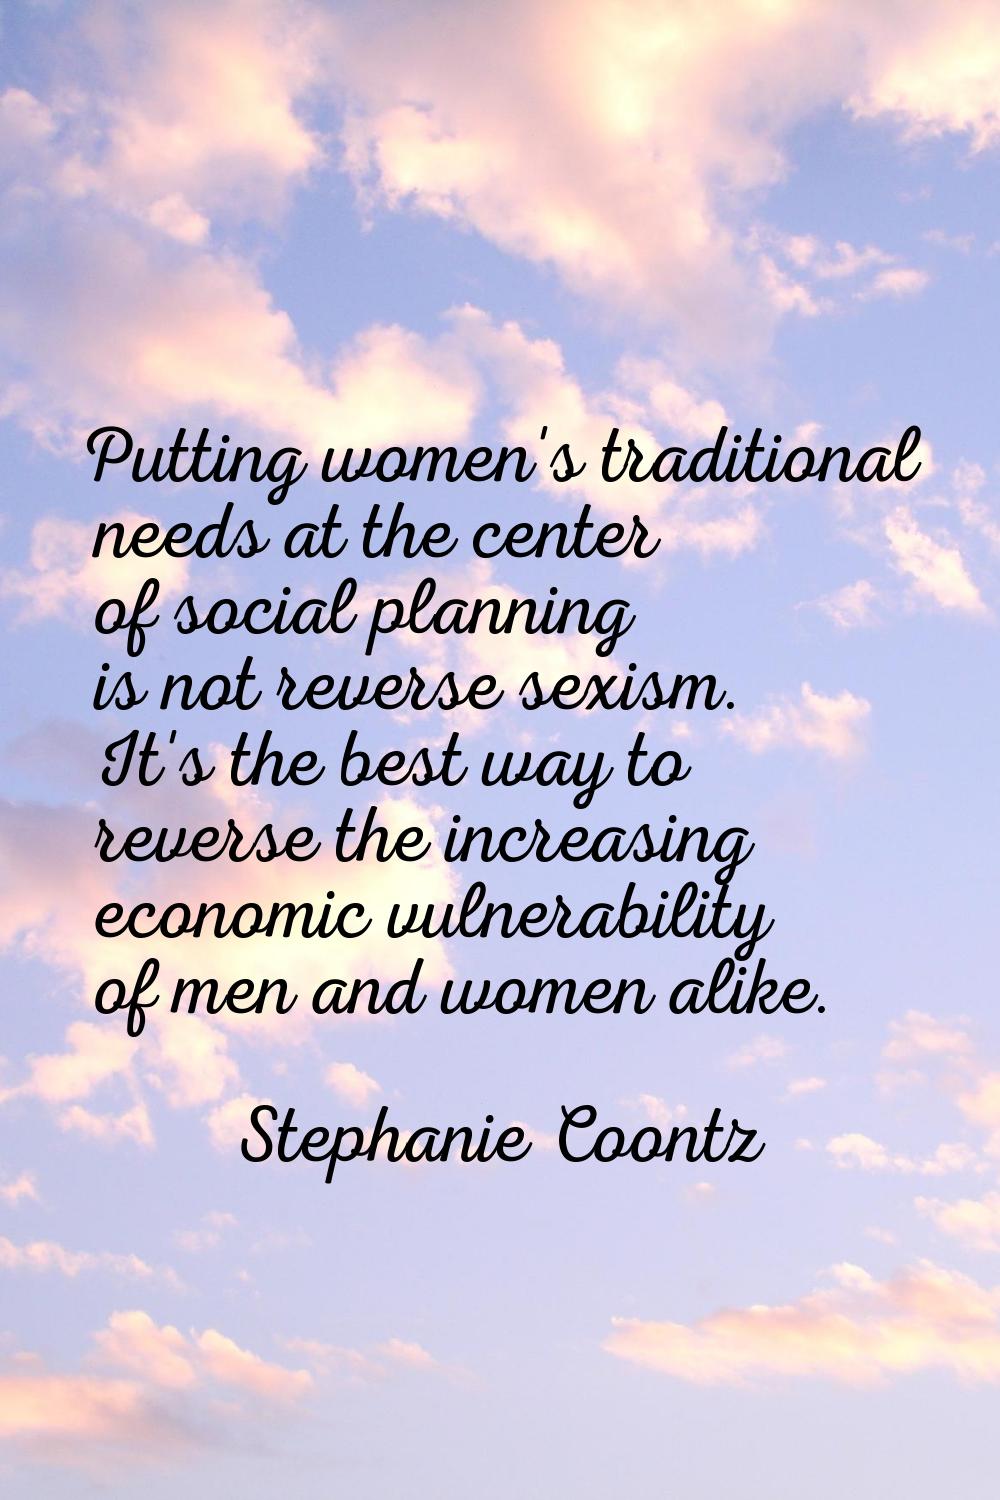 Putting women's traditional needs at the center of social planning is not reverse sexism. It's the 